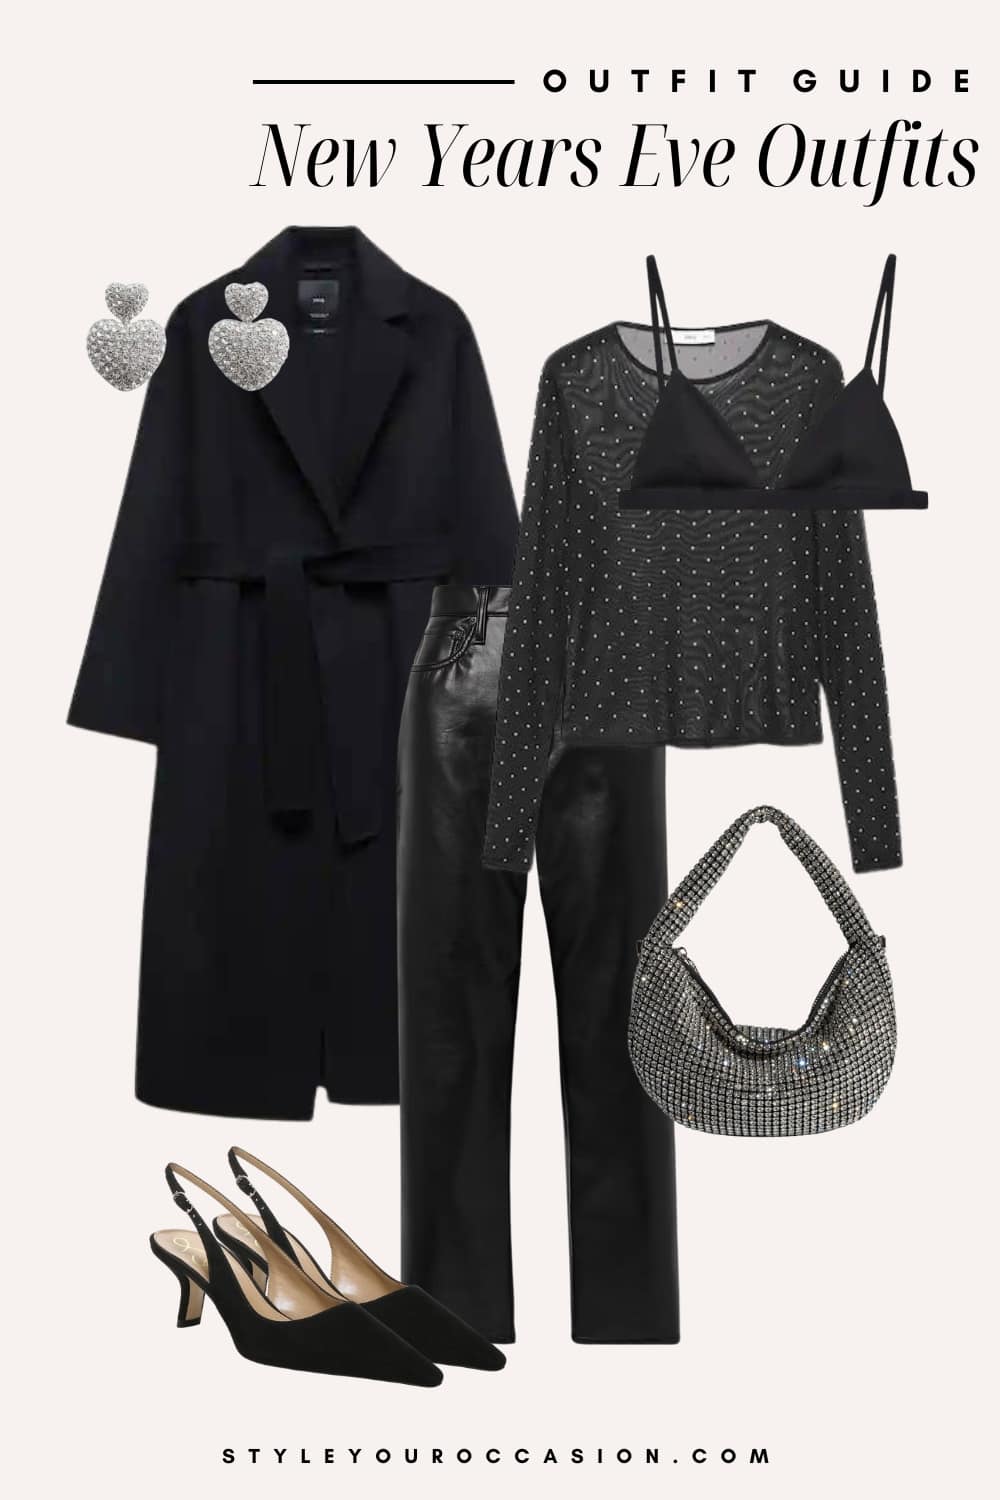 An image board of a New Year's Eve outfit featuring black leather pants, a gem embellished mesh long-sleeve top with a black bralette, a long black wool coat, black slingback heels, and a rhinestone covered handbag